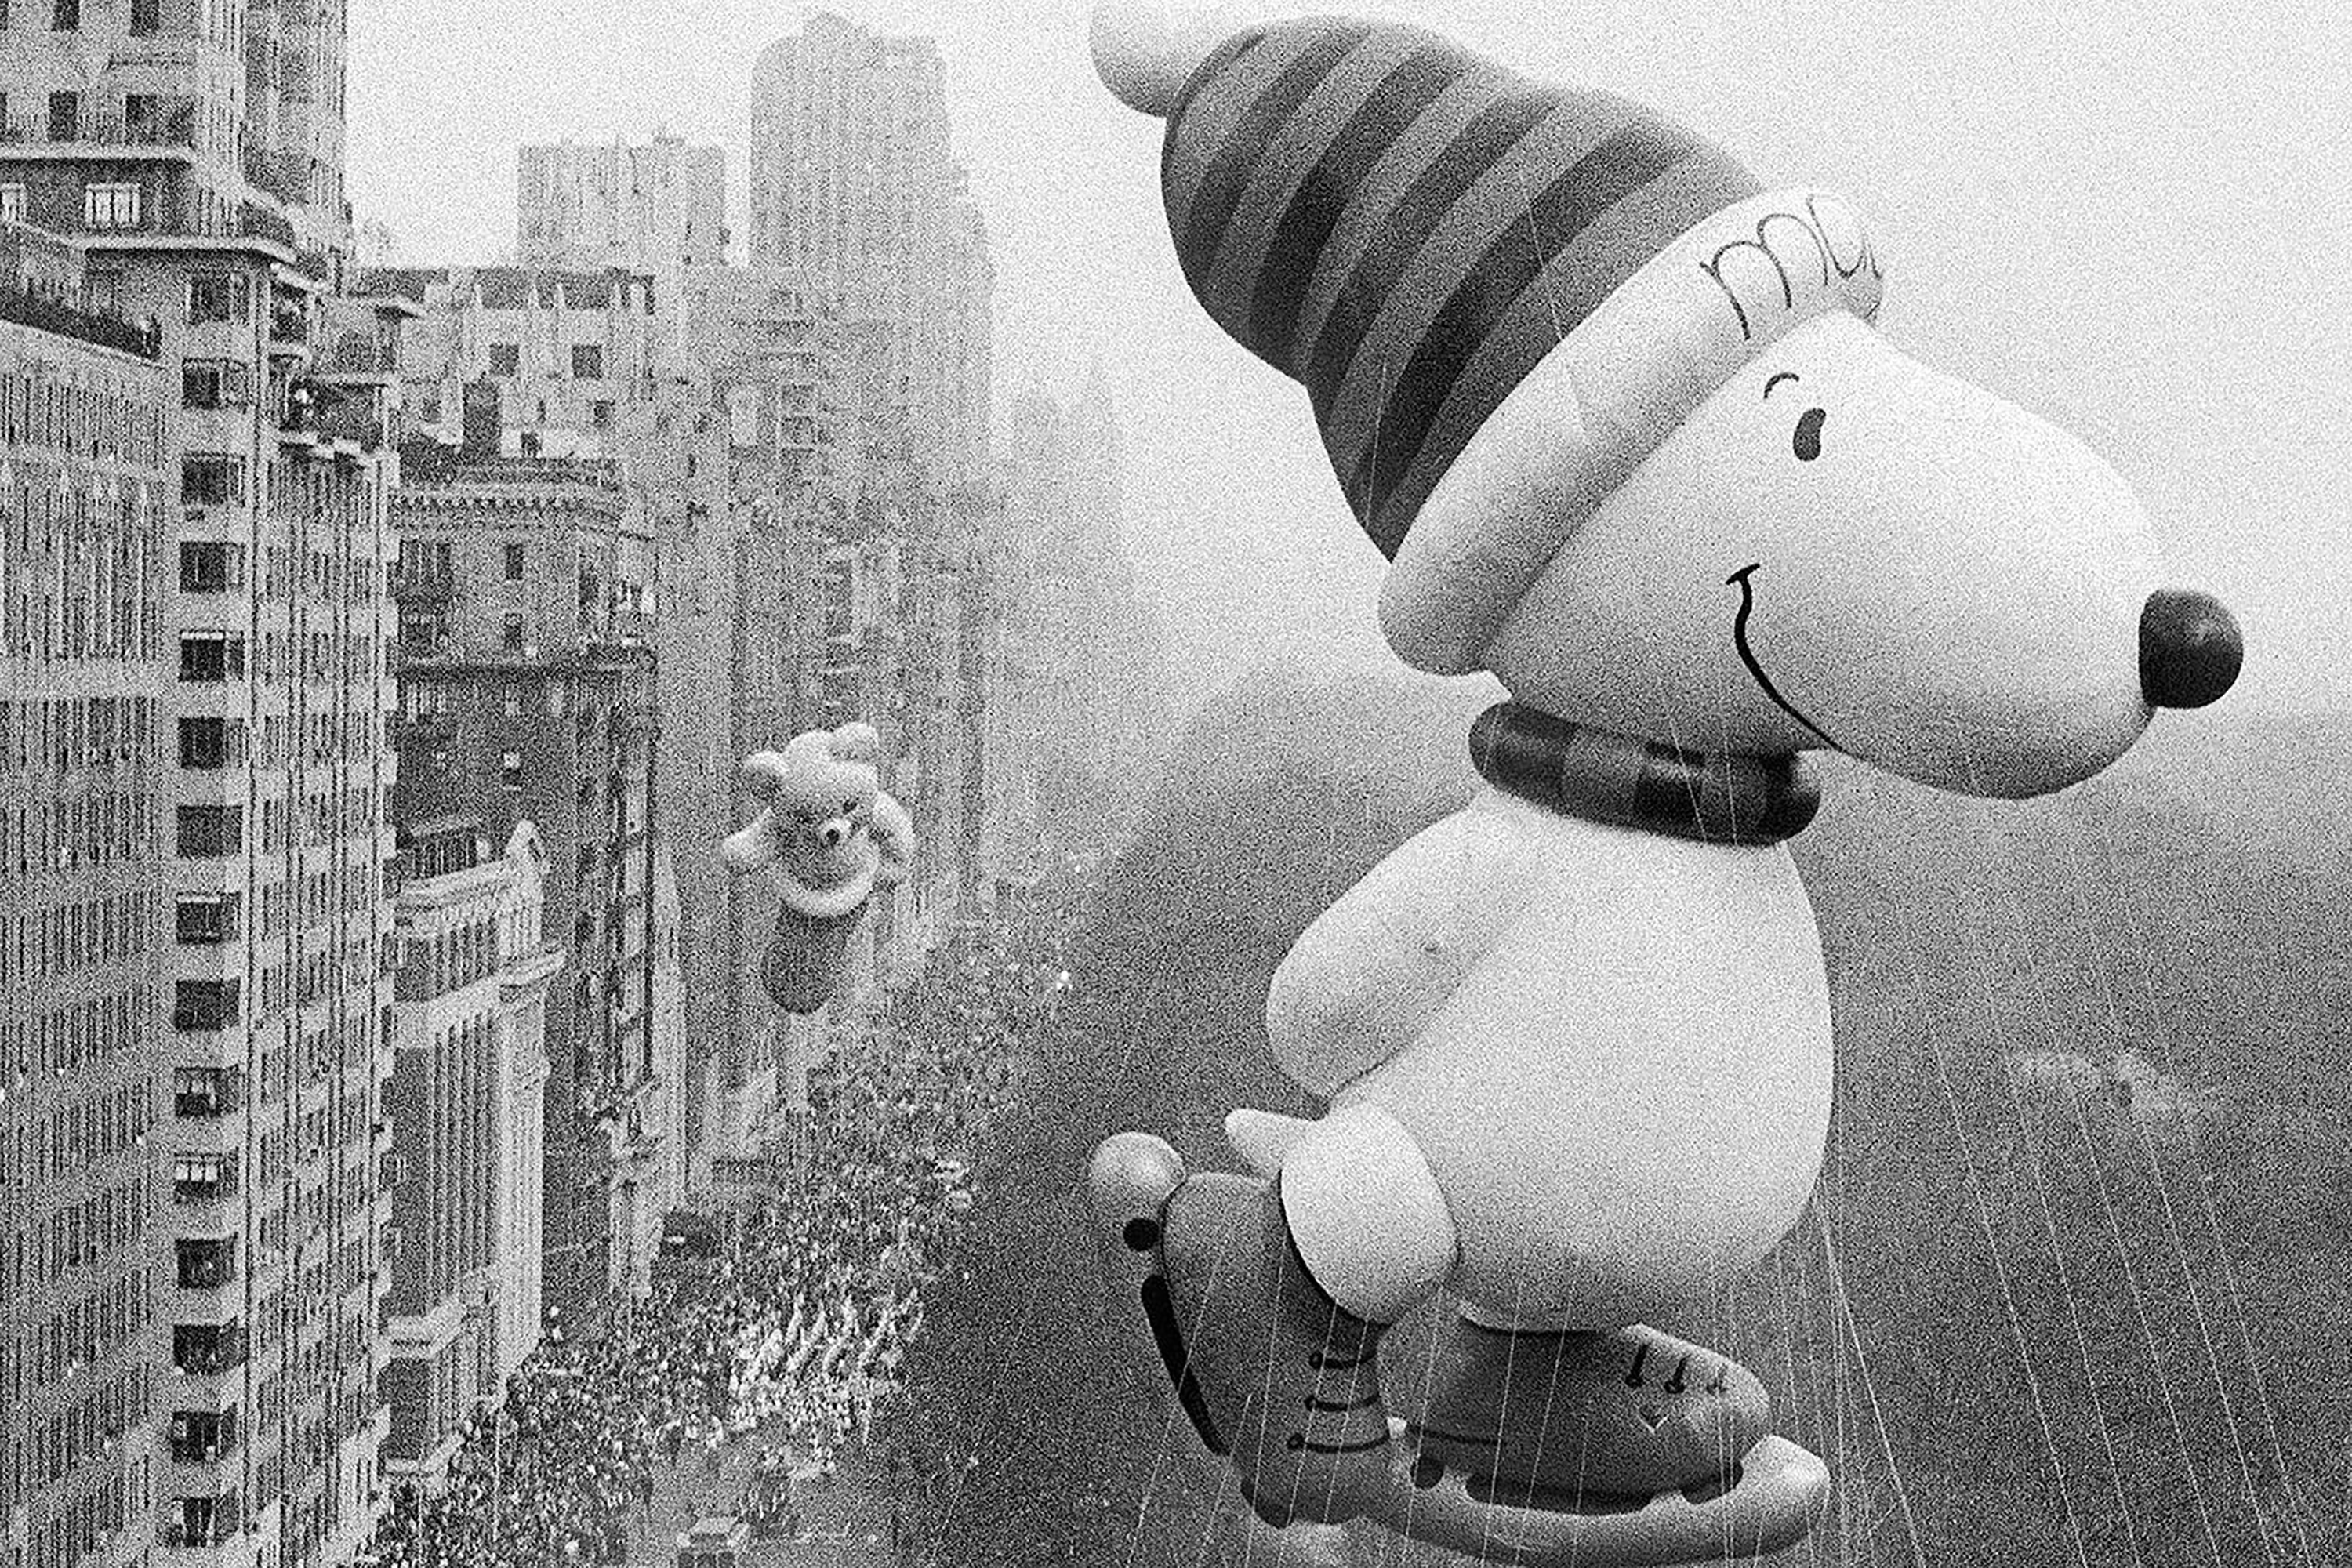 The Snoopy balloon rounds Columbus Circle during the annual Macy's Thanksgiving Day Parade in New York in 1987.